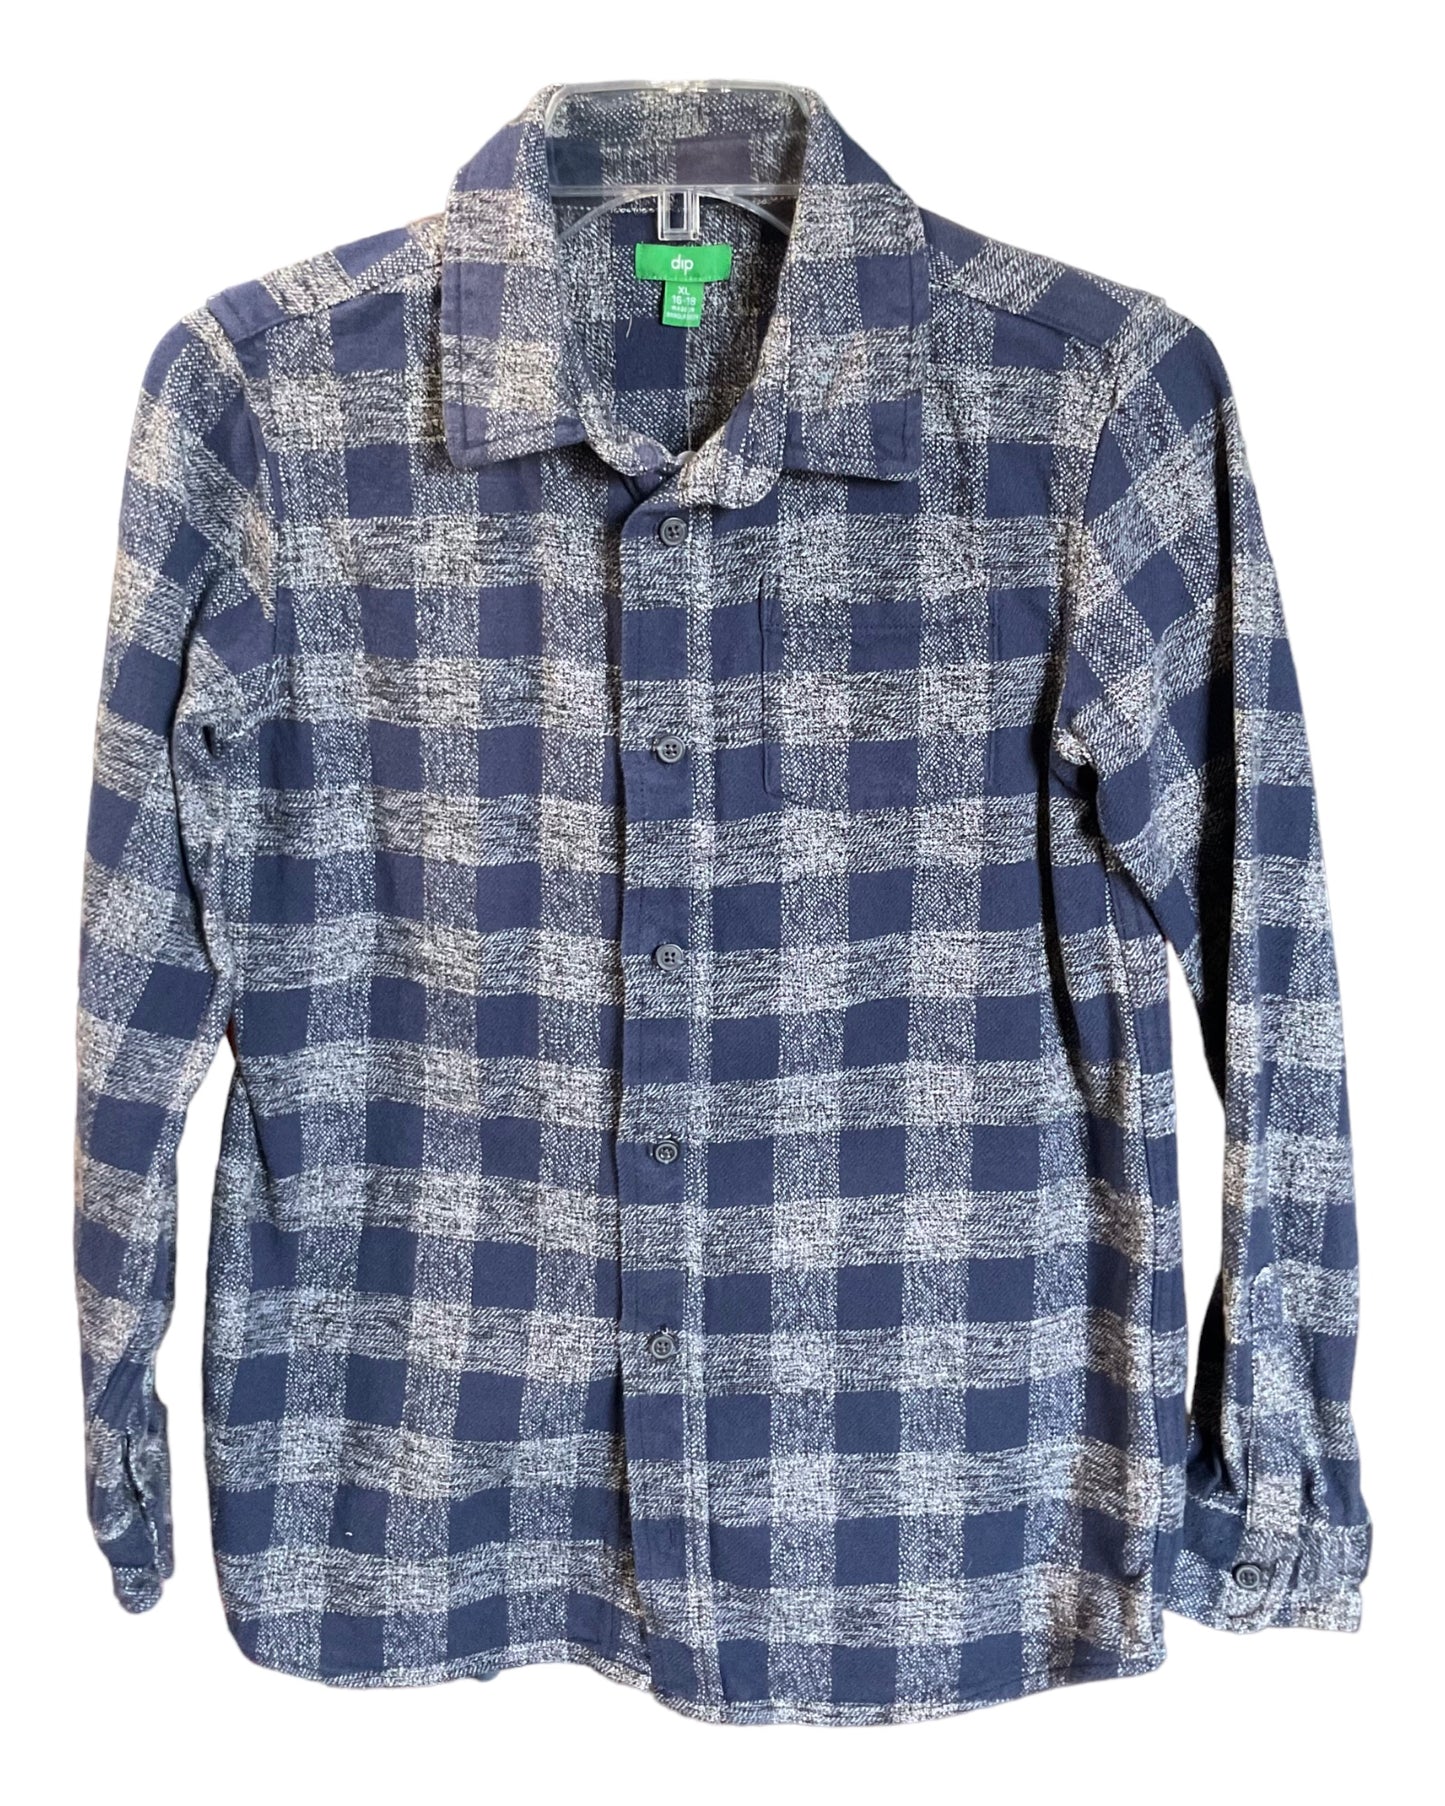 DIP Thick Fitted Blue and Gray Long Sleeve Boys Shirt Size XL(16-18)